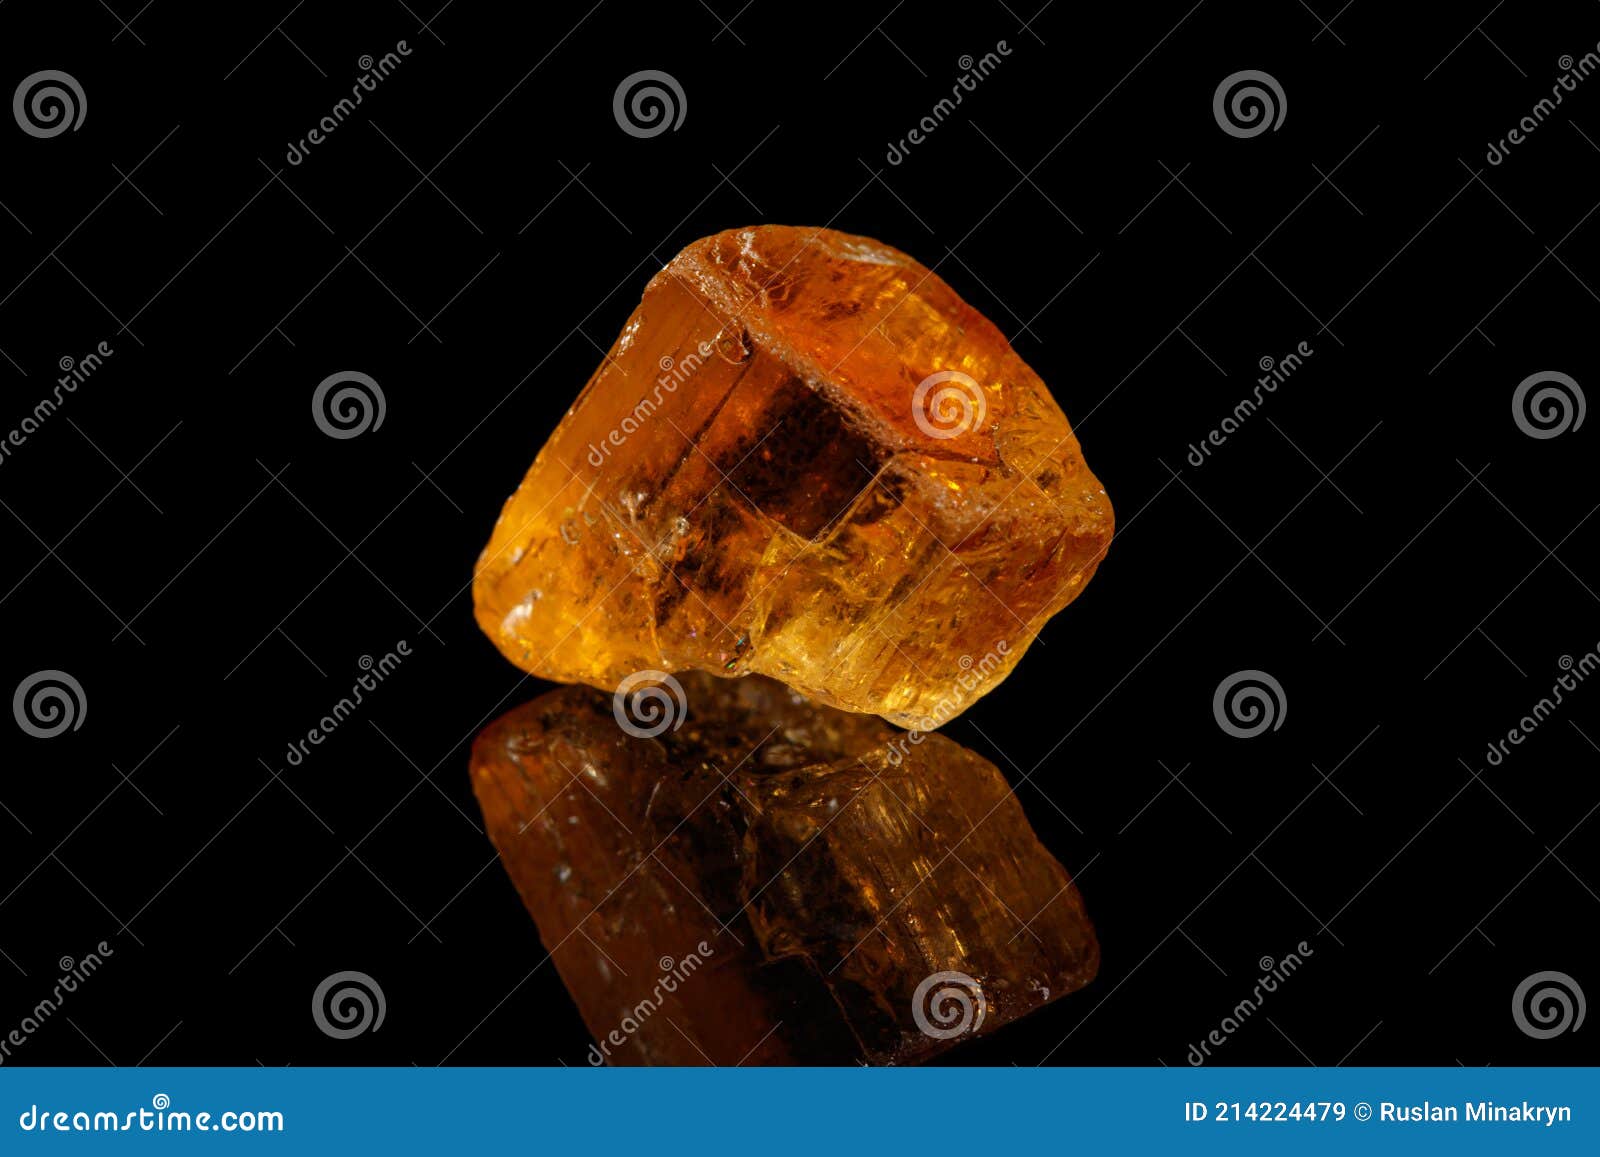 macro stone mineral yellow topaz on a black background